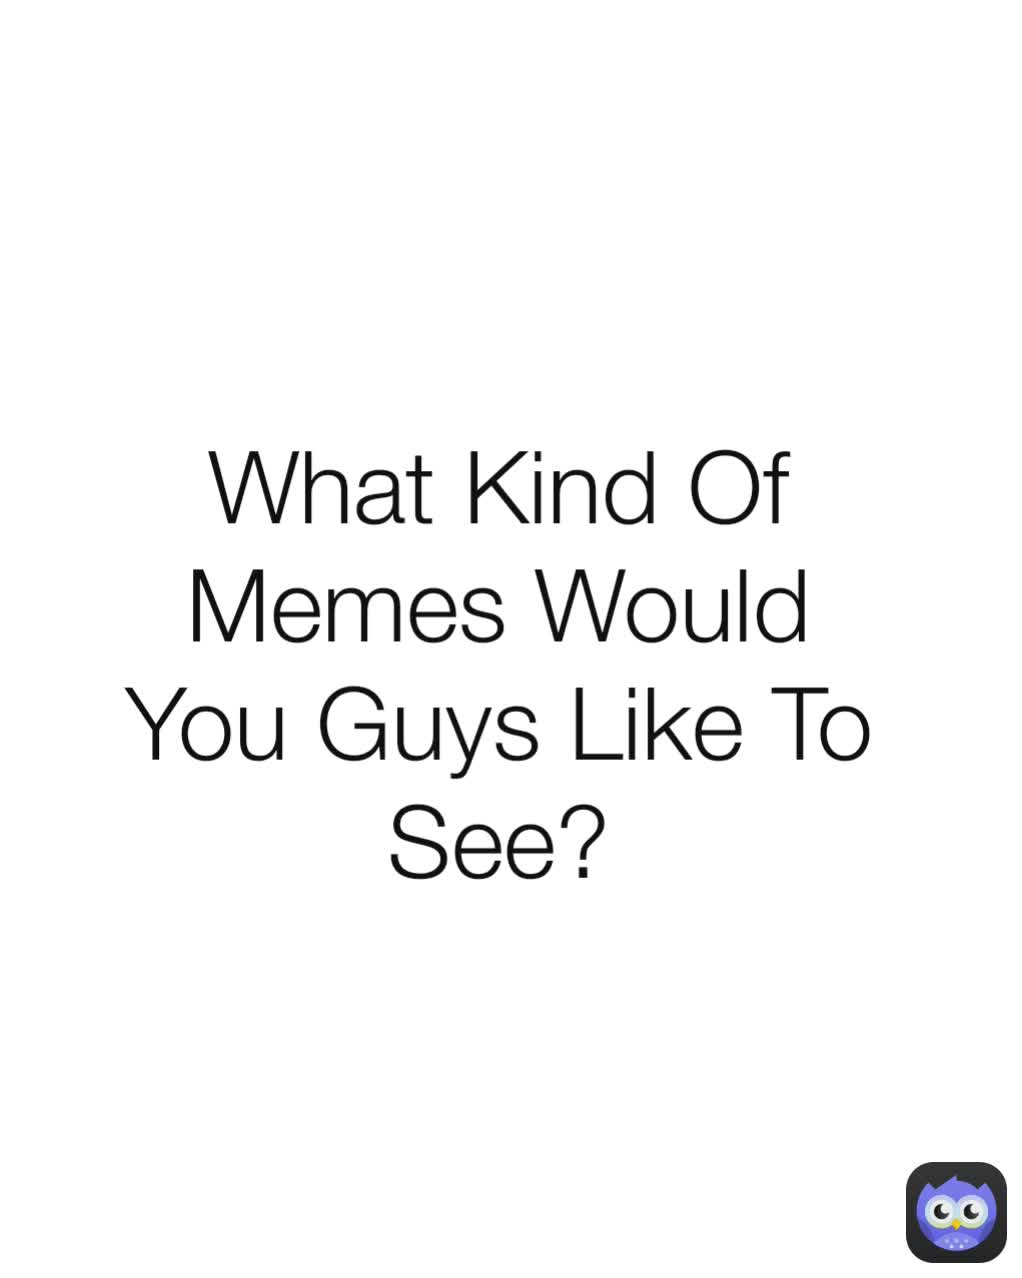 What Kind Of Memes Would You Guys Like To See?